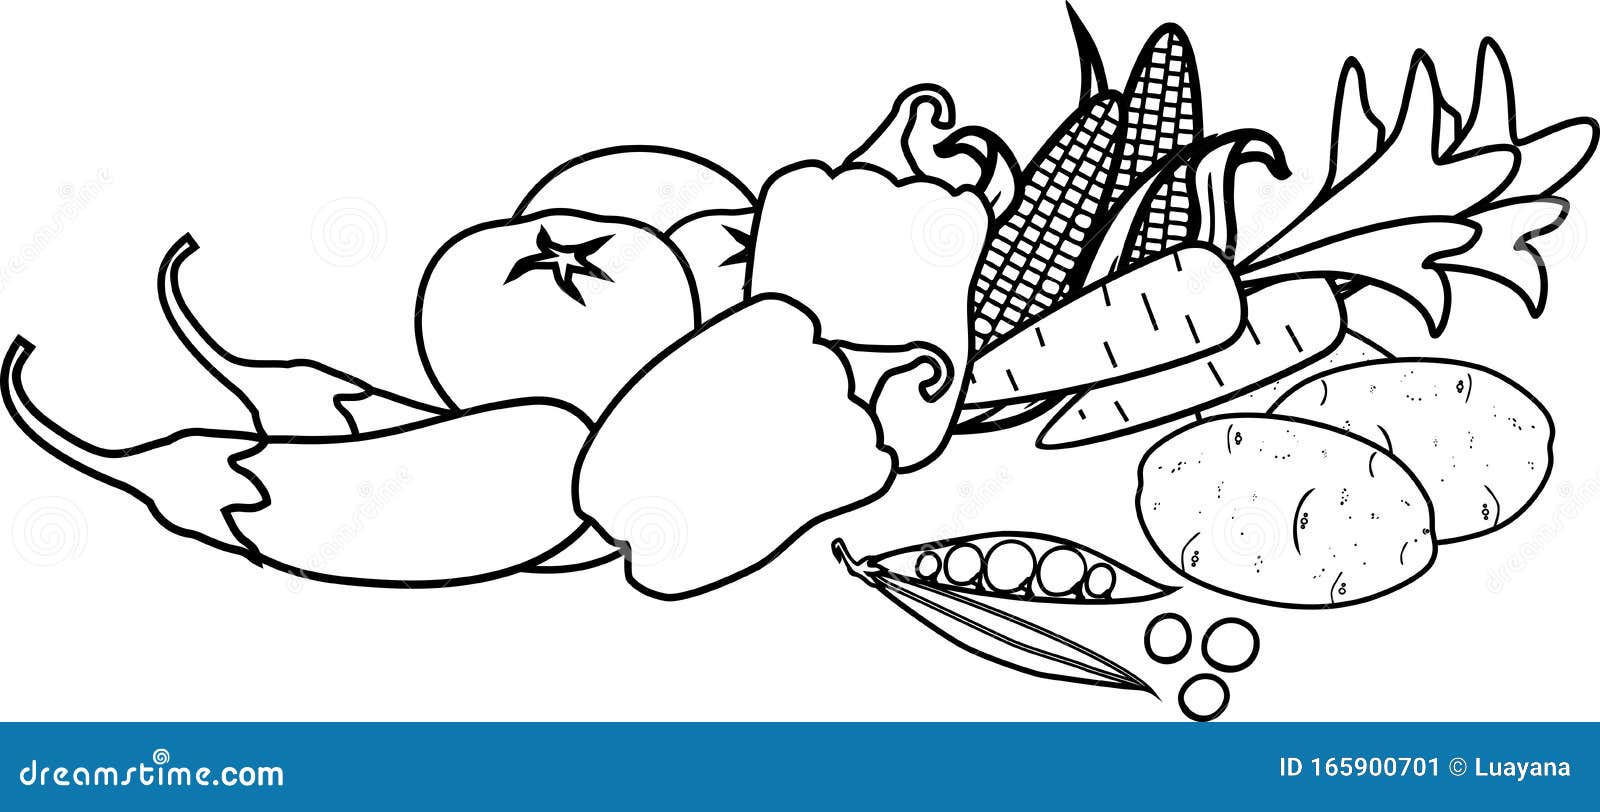 Download Coloring Page. Composition Of Different Vegetables Stock Vector - Illustration of ingredient ...